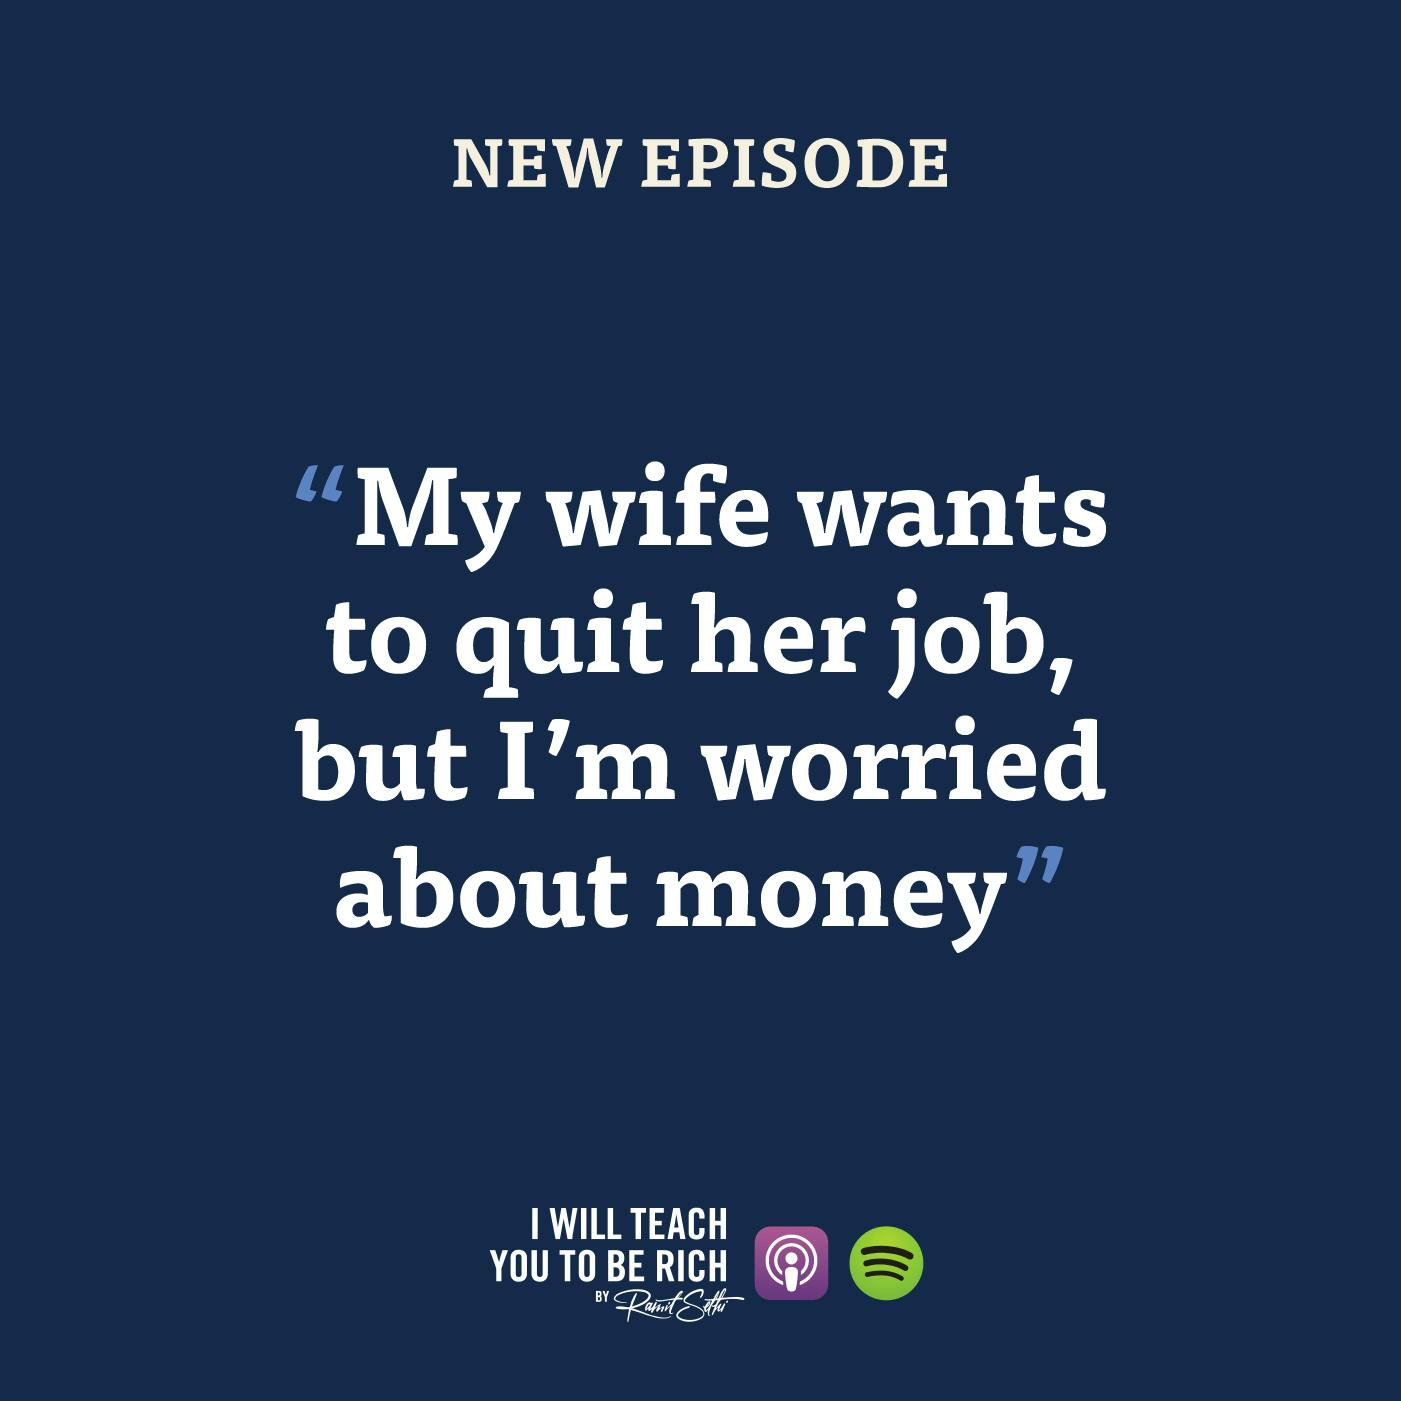 11. “My wife wants to quit her job but I’m worried about money”